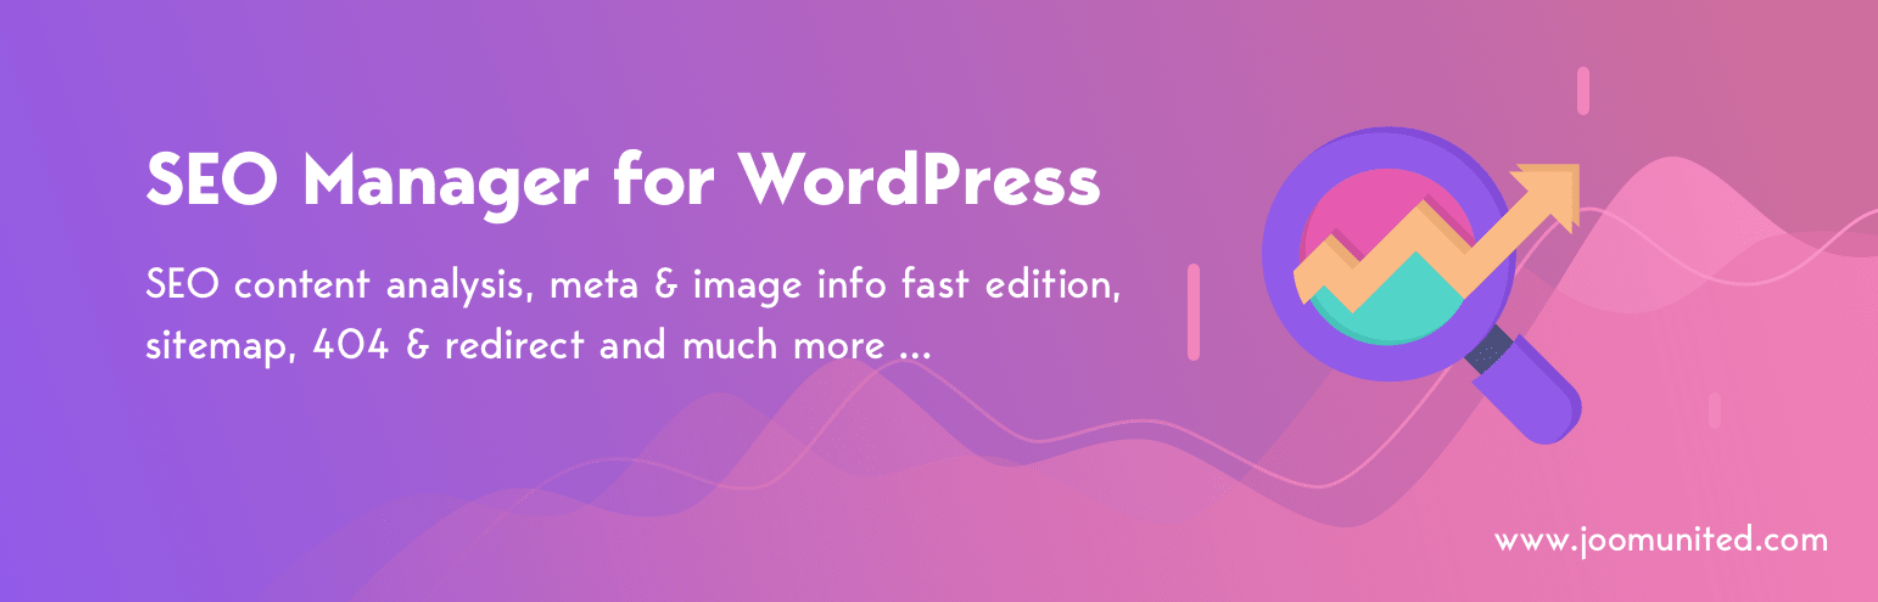 SEO Manager for WordPress